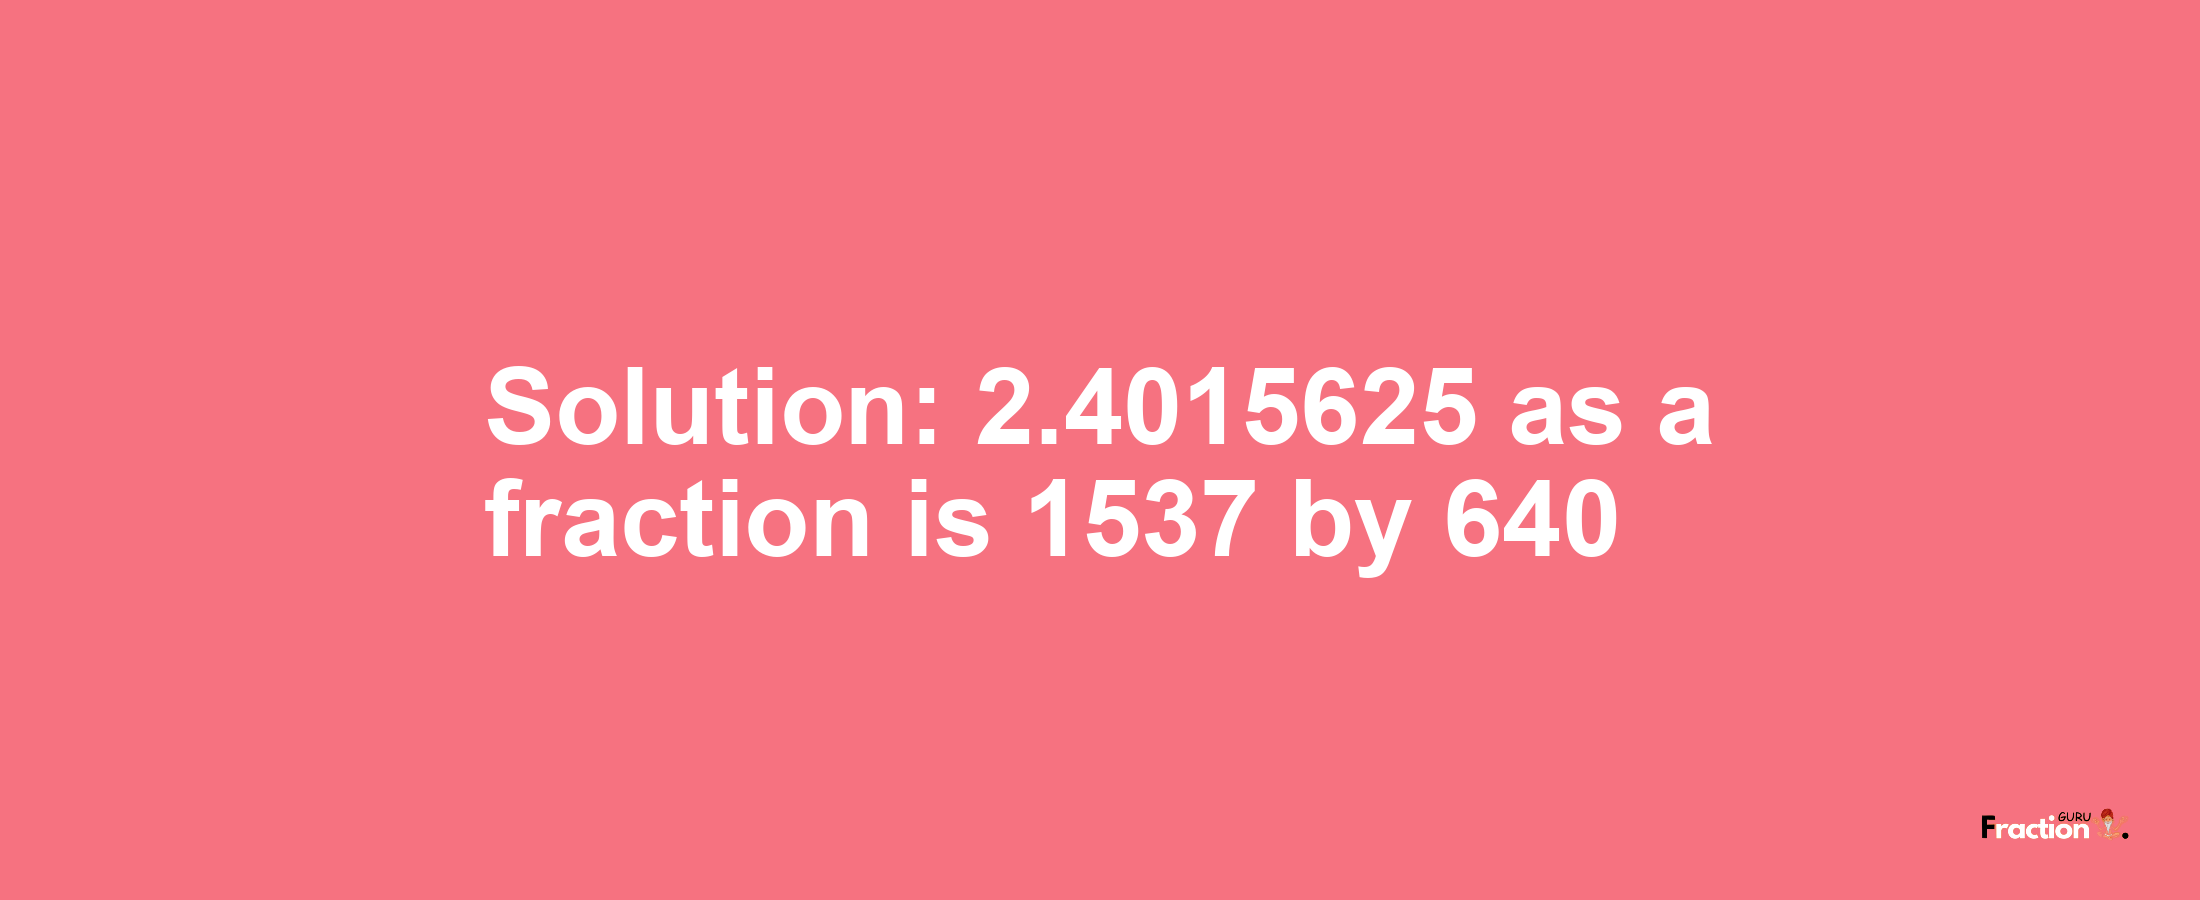 Solution:2.4015625 as a fraction is 1537/640